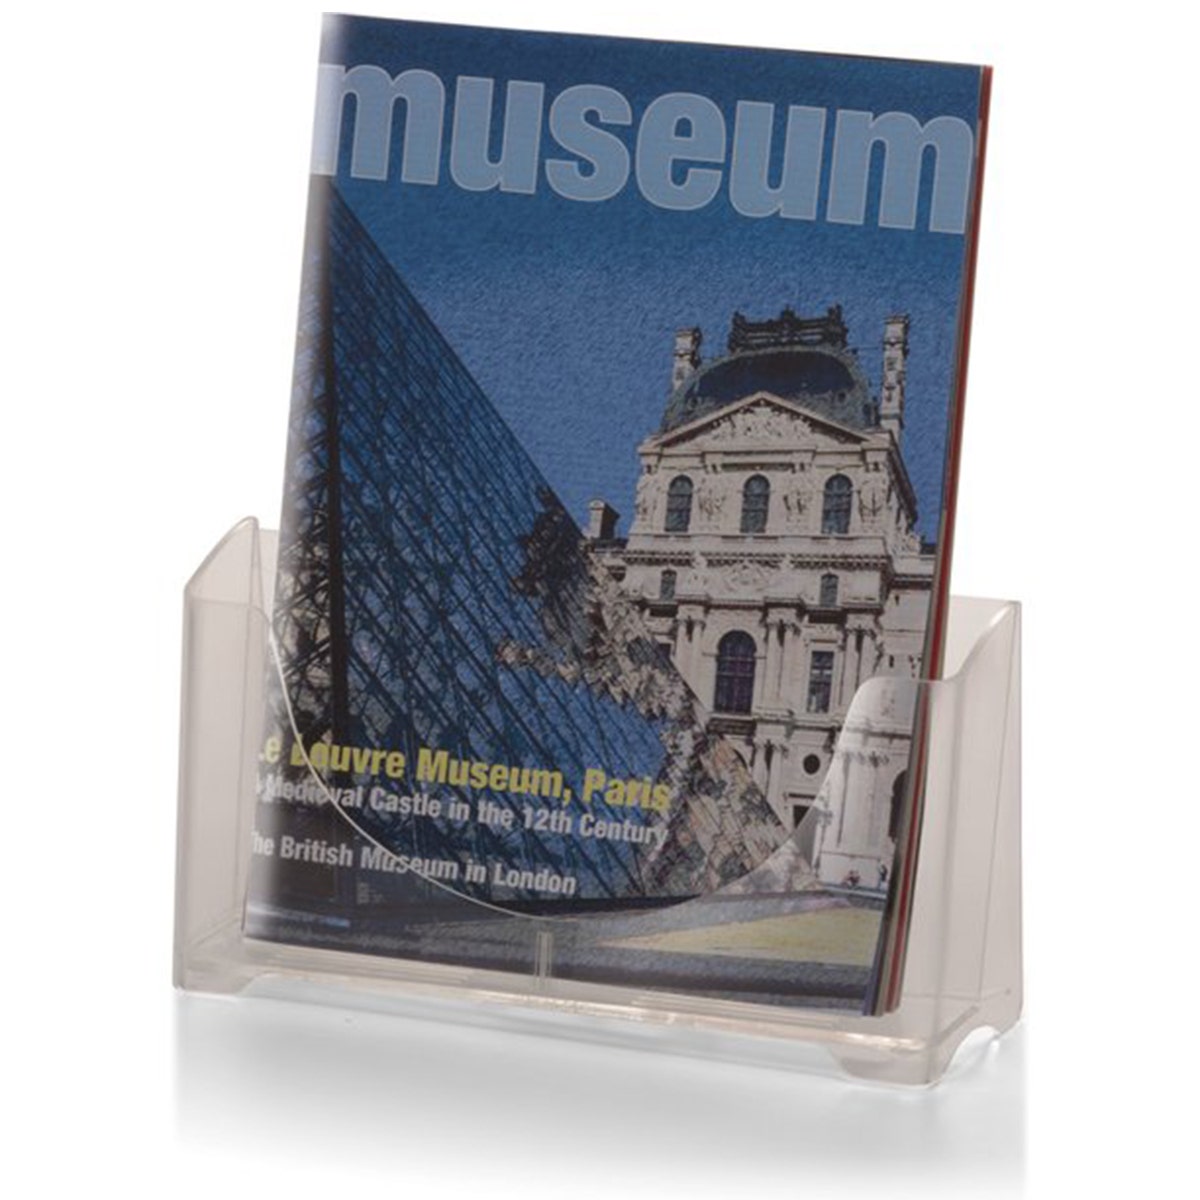 Magazine & Literature Holder – Stand or Wall Mount Display